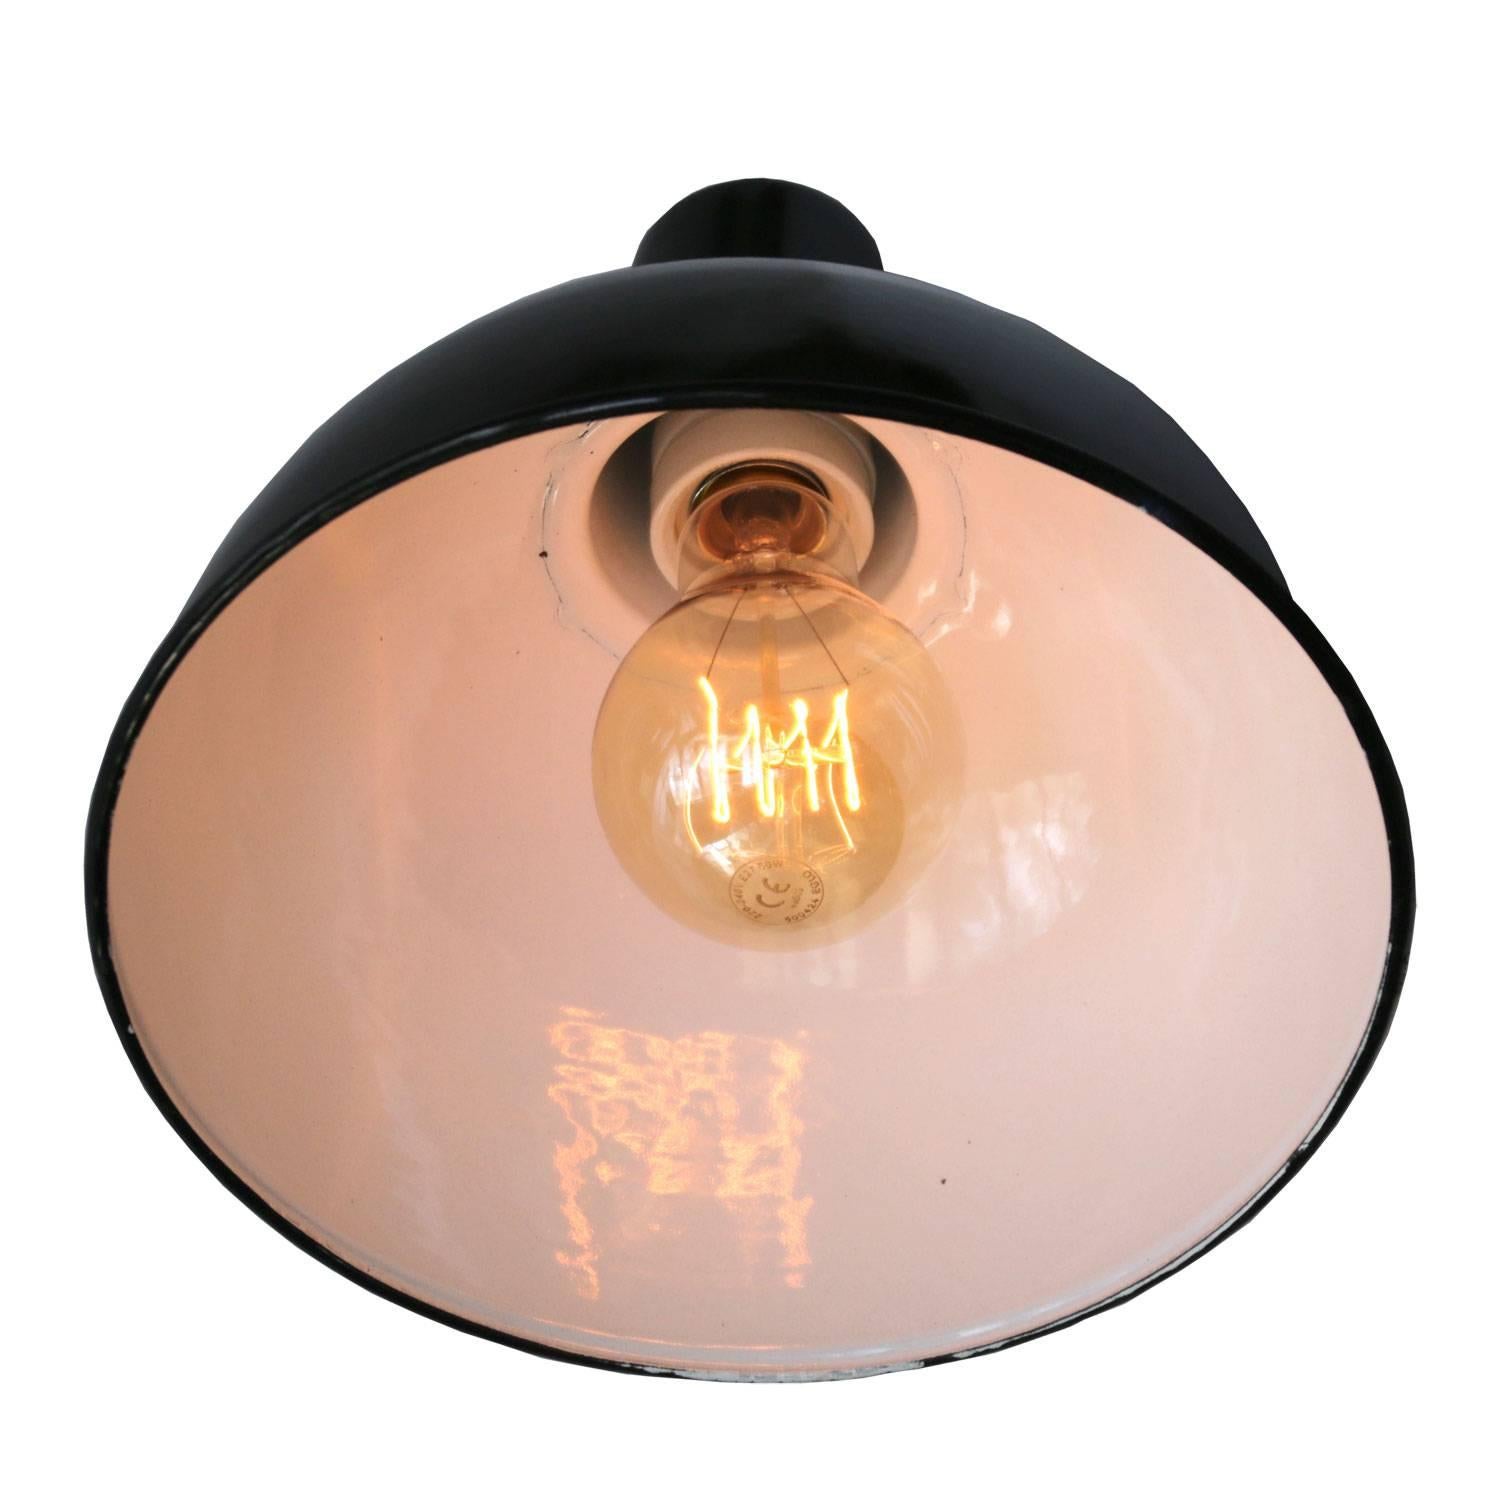 Factory hanging light. Black enamel. White interior.

Weight: 1.0 kg / 2.2 lb

Priced per individual item. All lamps have been made suitable by international standards for incandescent light bulbs, energy-efficient and LED bulbs. E26/E27 bulb